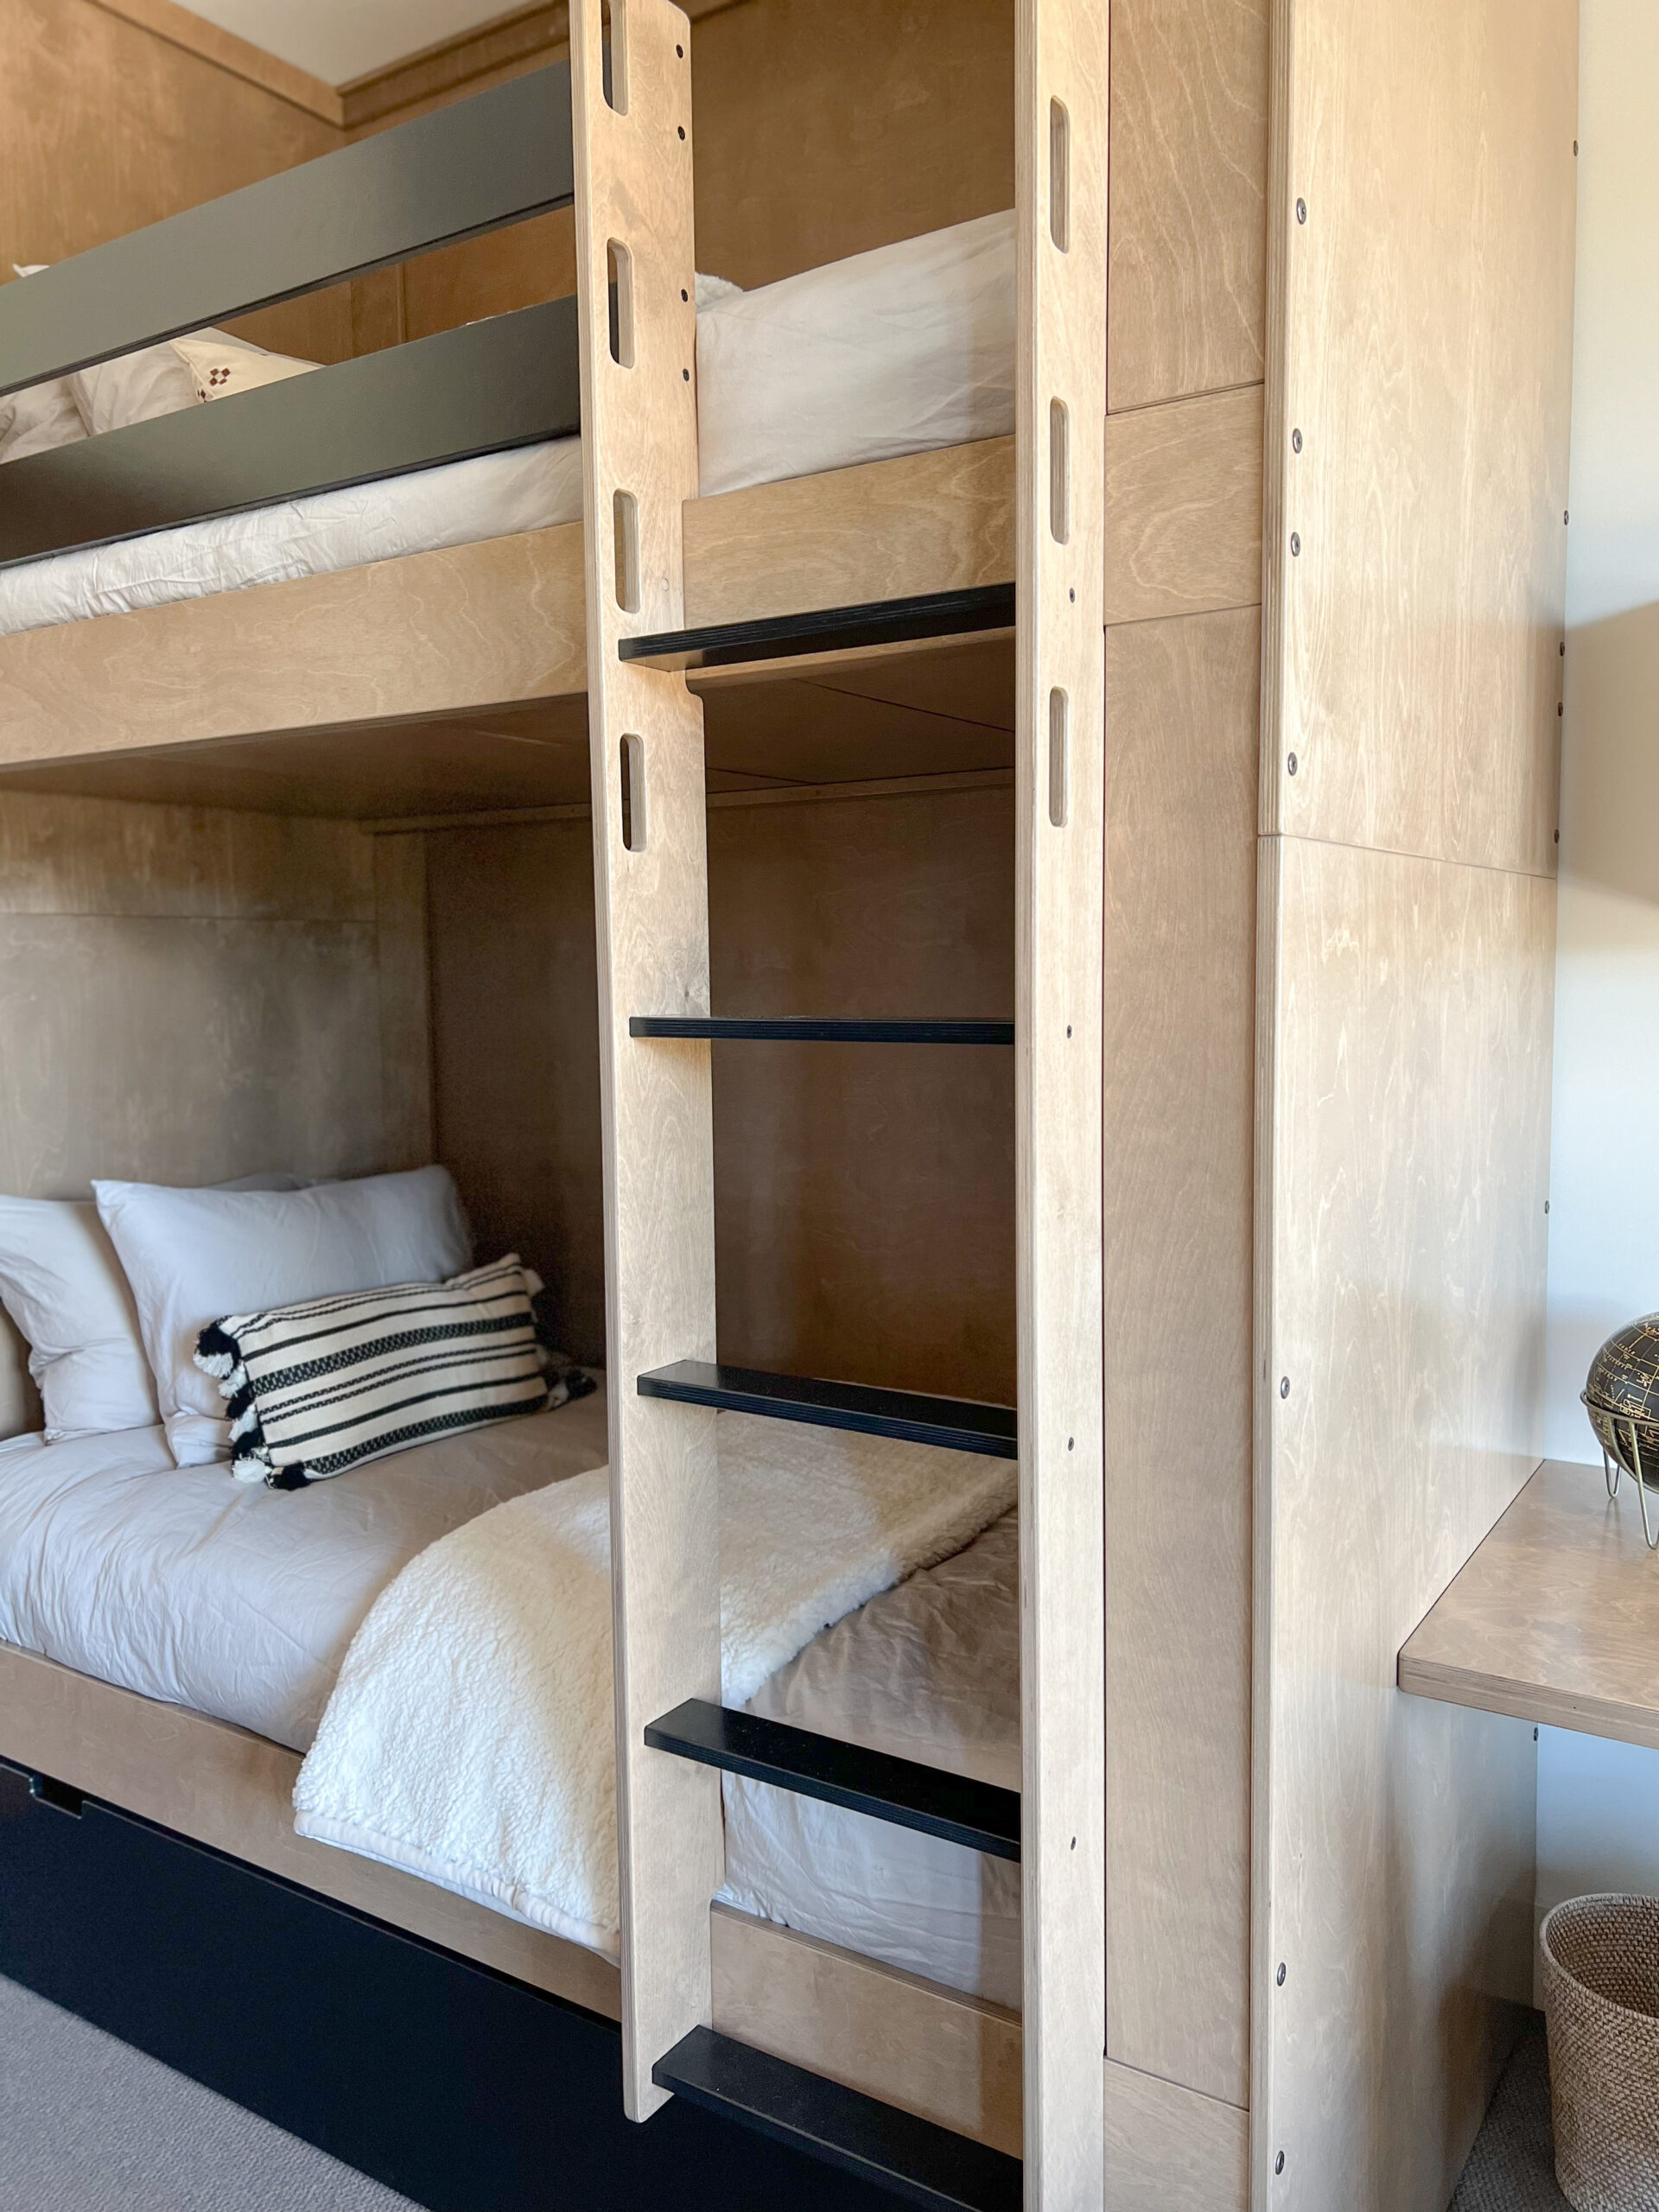 a beautiful bunk room design all custom made to fit this room made out of birch multiply finished in a warm driftwood stain with black accents.